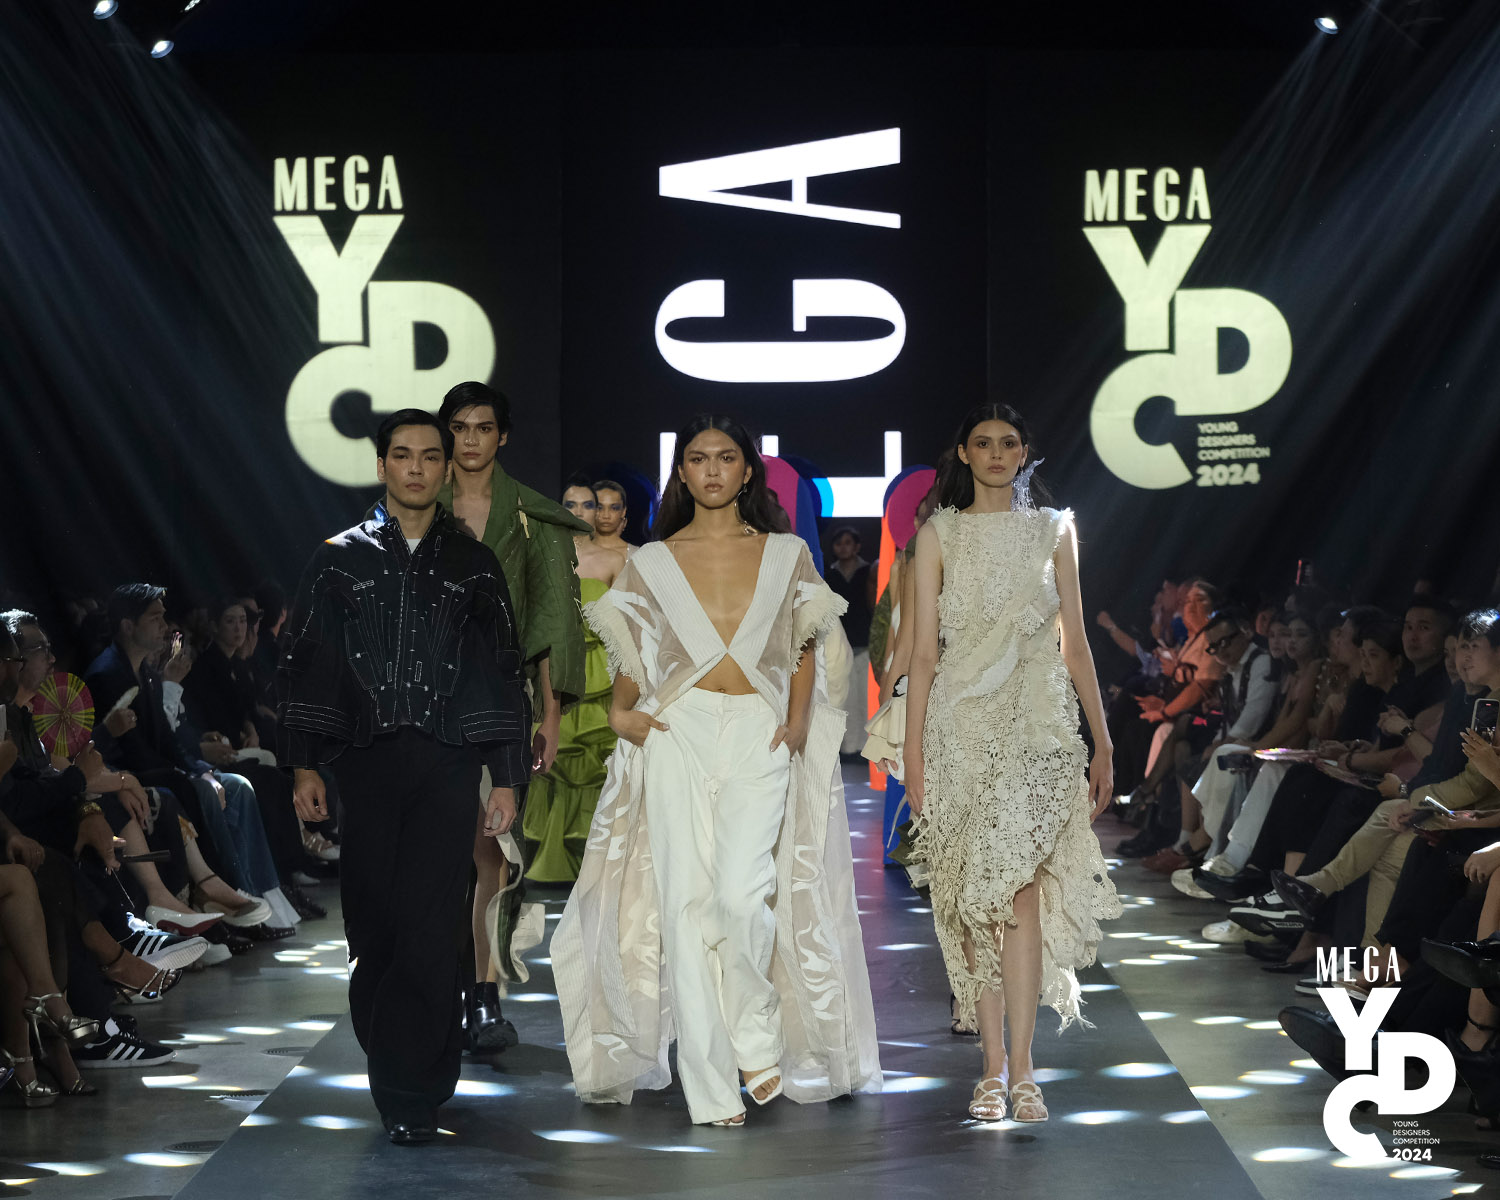 MEGA YDC 2024 highlights Renz Reyes's Archtrivial